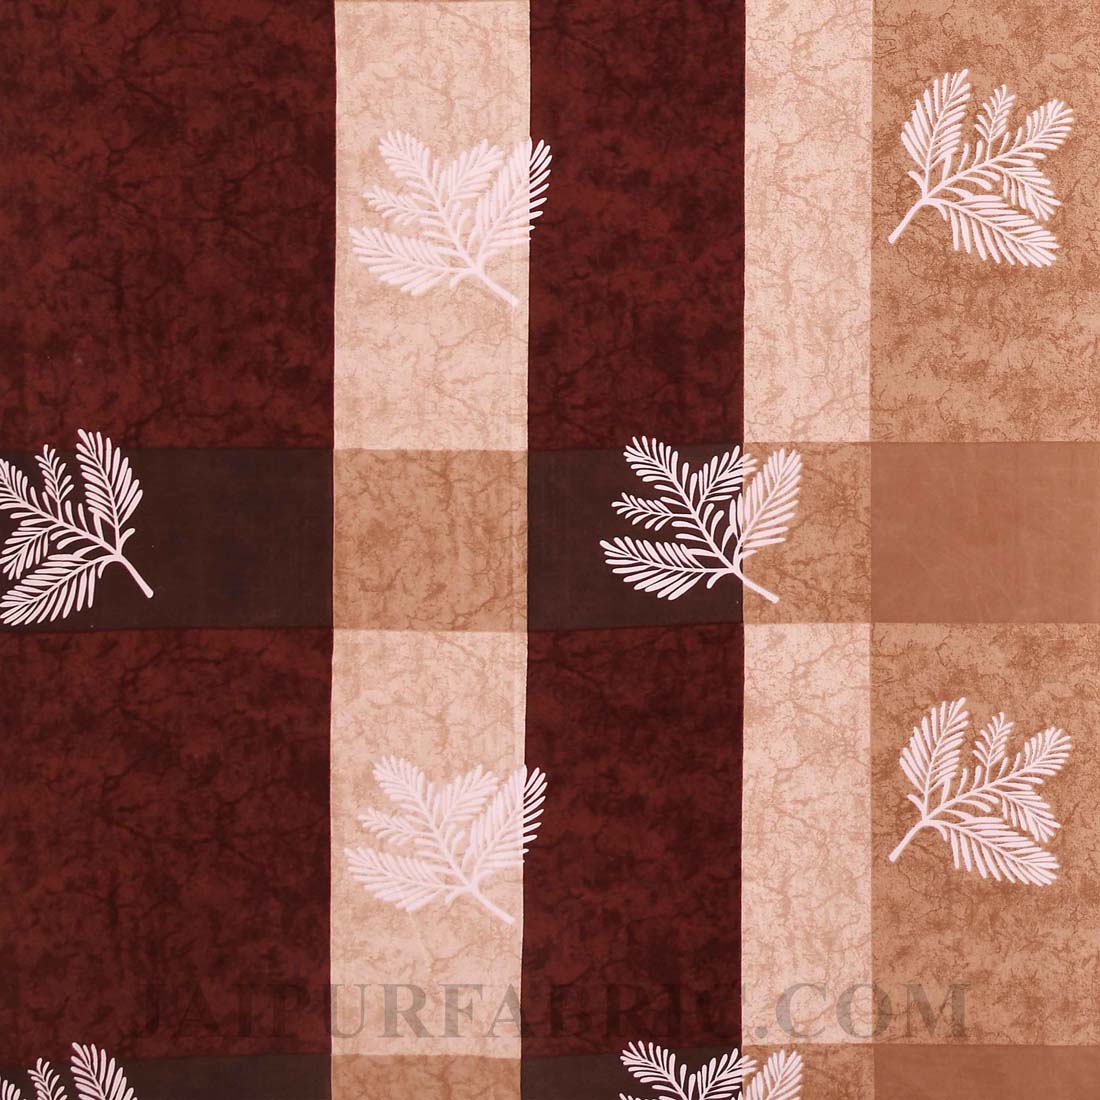 Leafy Decor Maroon Poly Cotton Double Bedsheet